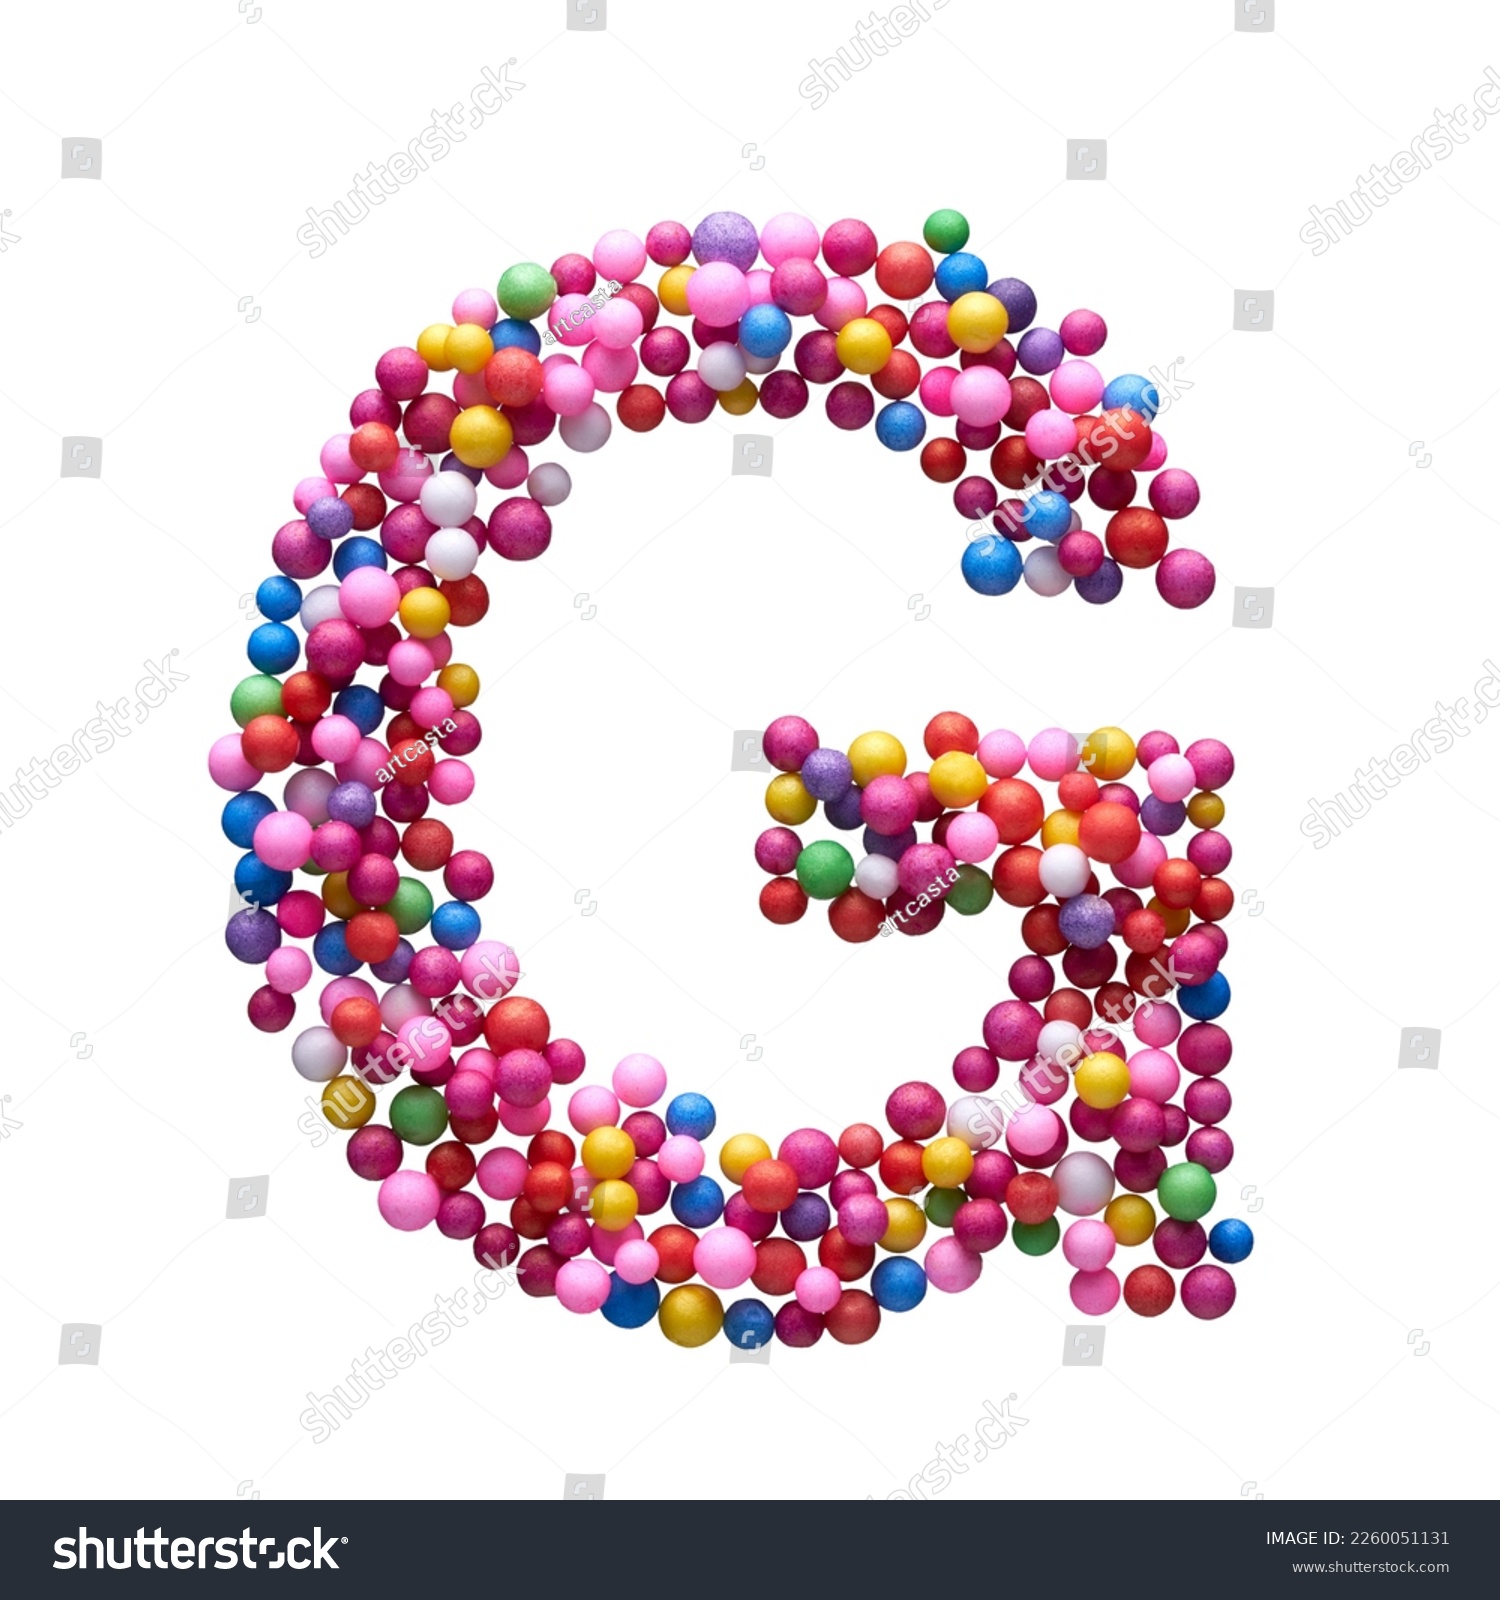 Capital letter G made of multi-colored balls, isolated on a white background. #2260051131